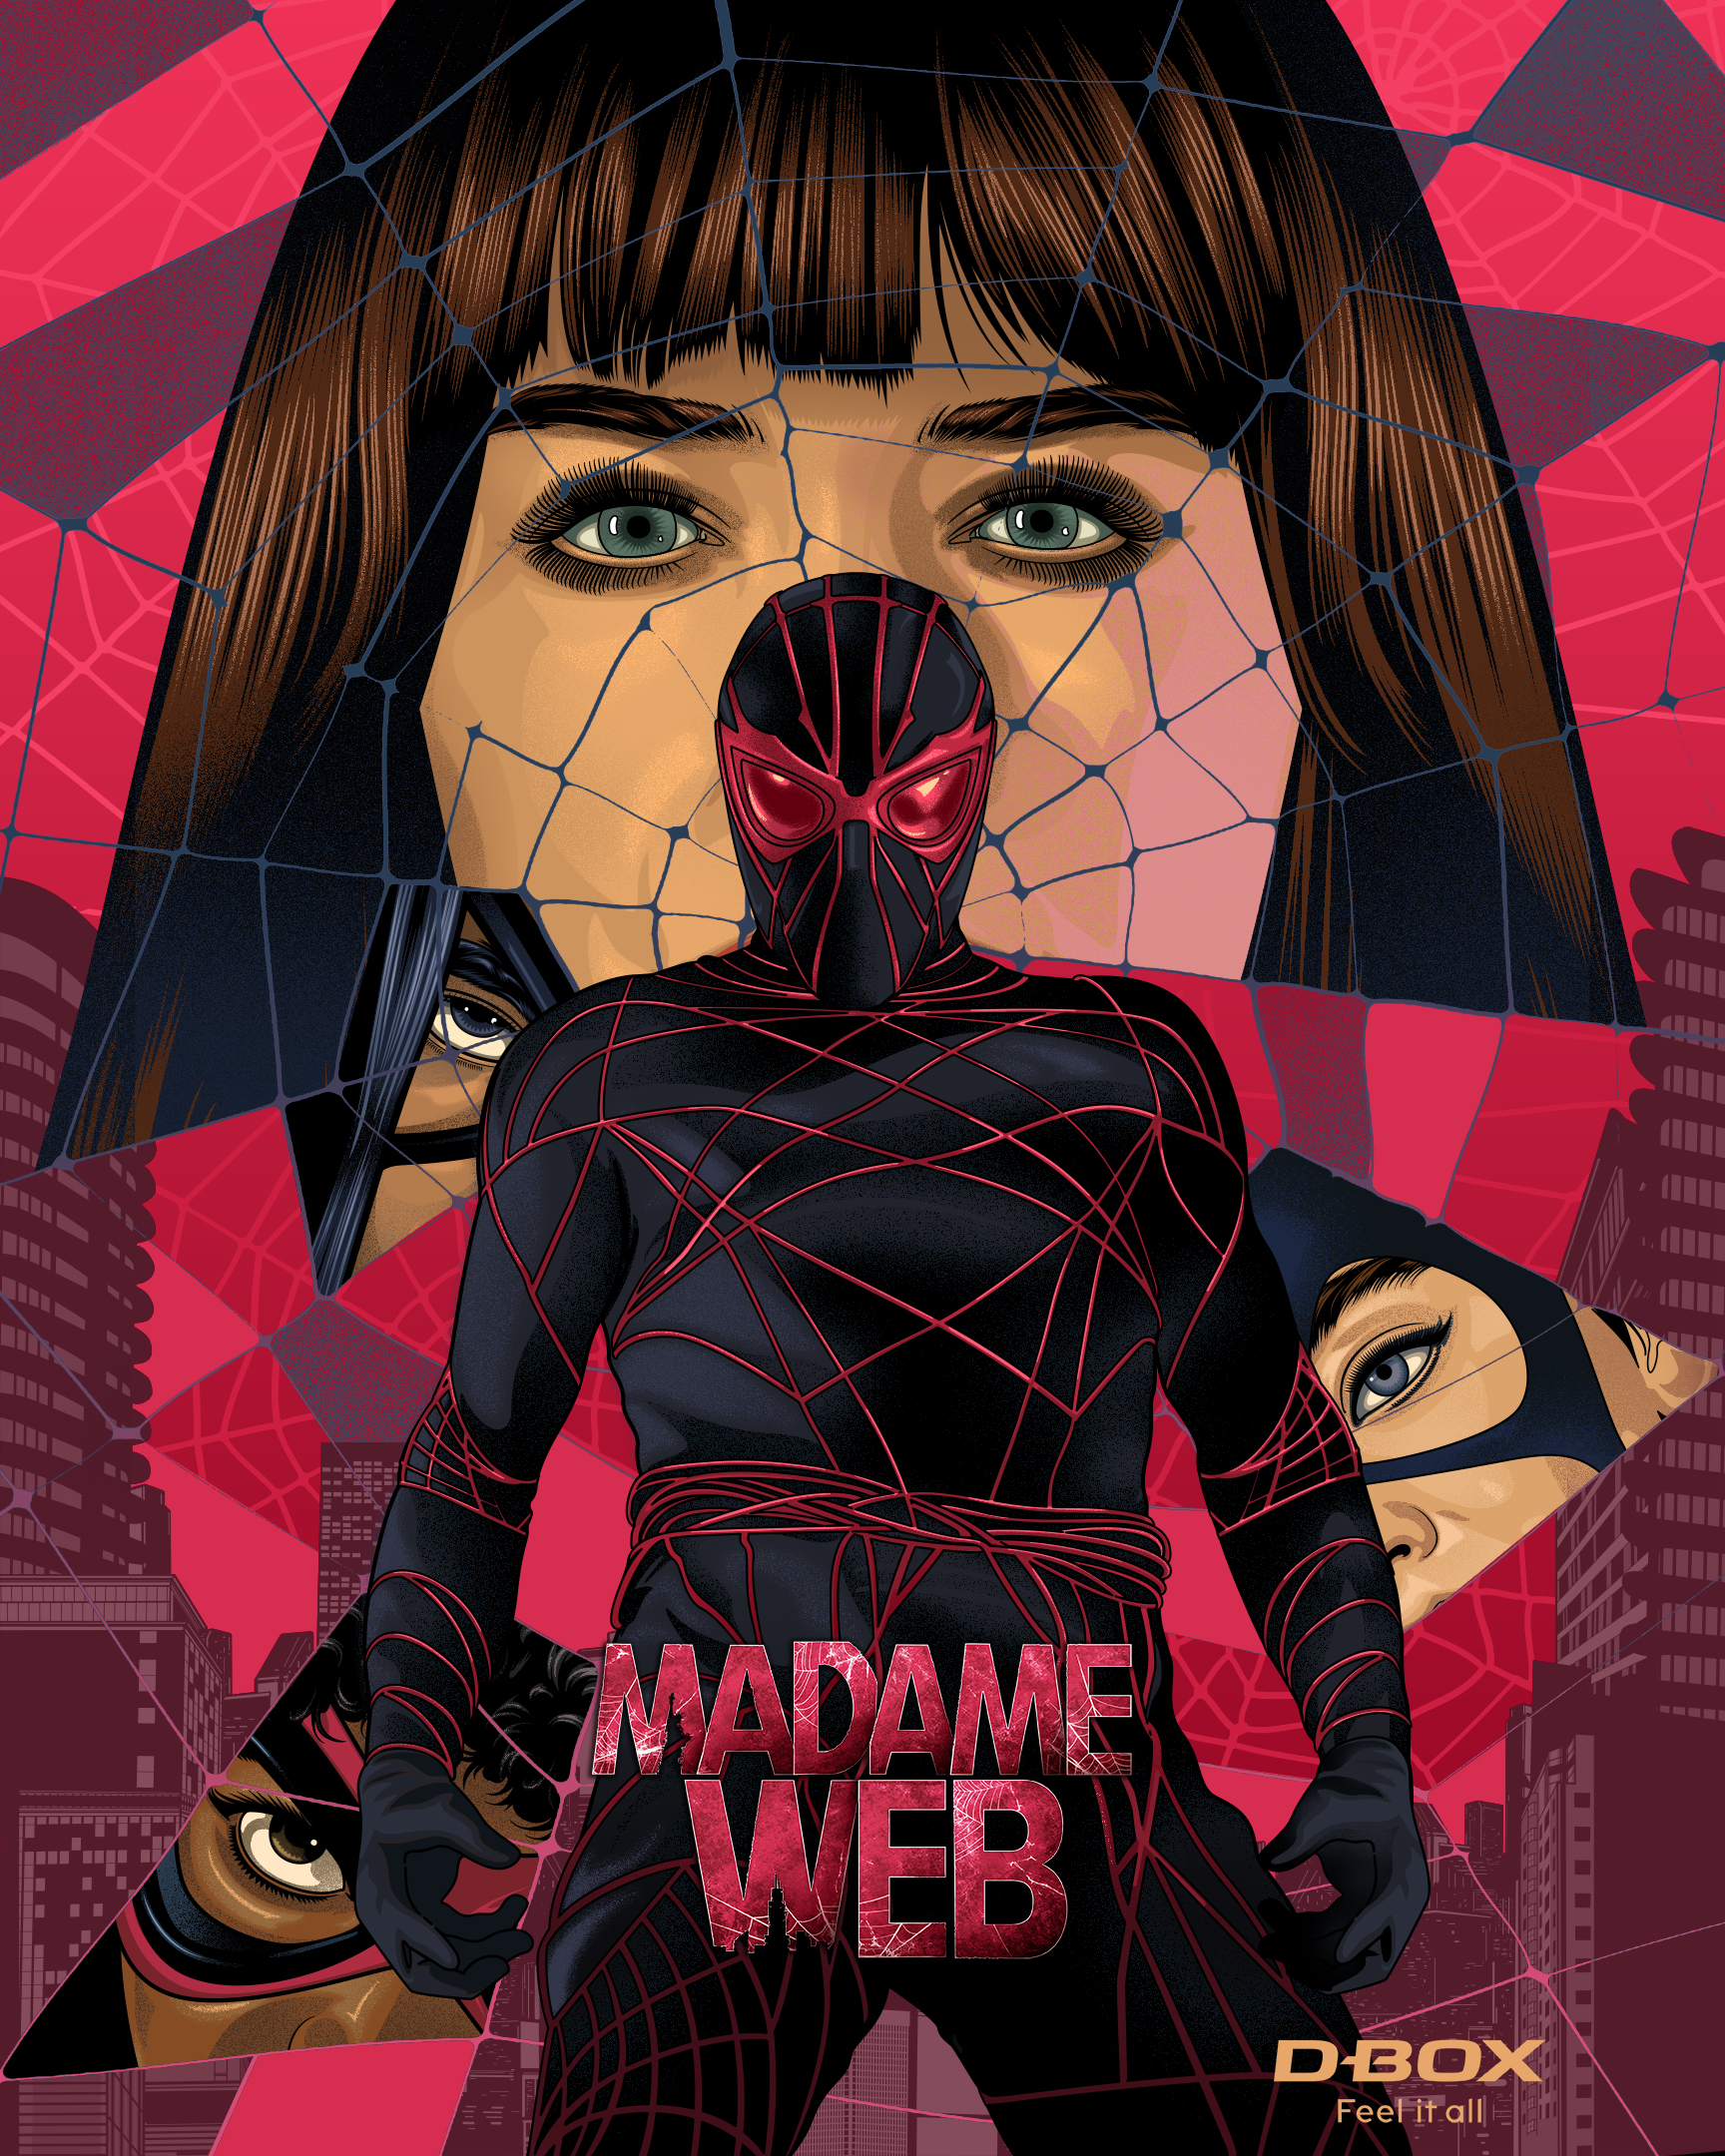 Artwork by Madame Web – Sony Pictures